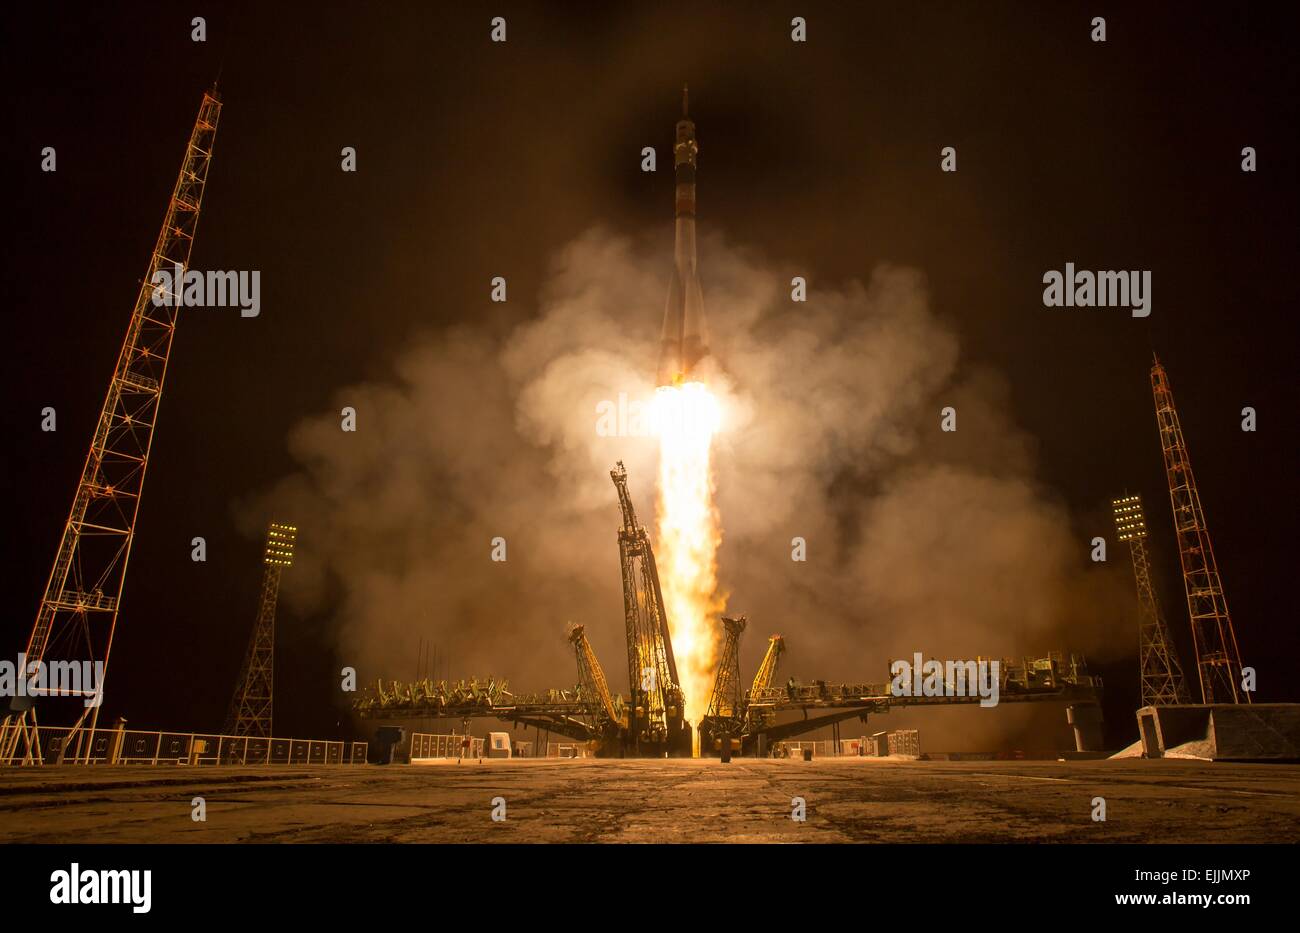 The Russian Soyuz TMA-16M rocket launches to the International Space Station carrying Expedition 43 crew March 27, 2015 in Baikonur, Kazakhstan. NASA astronaut Scott Kelly and cosmonauts Mikhail Kornienko and Gennady Padalka are on a year long mission onboard the ISS. Stock Photo